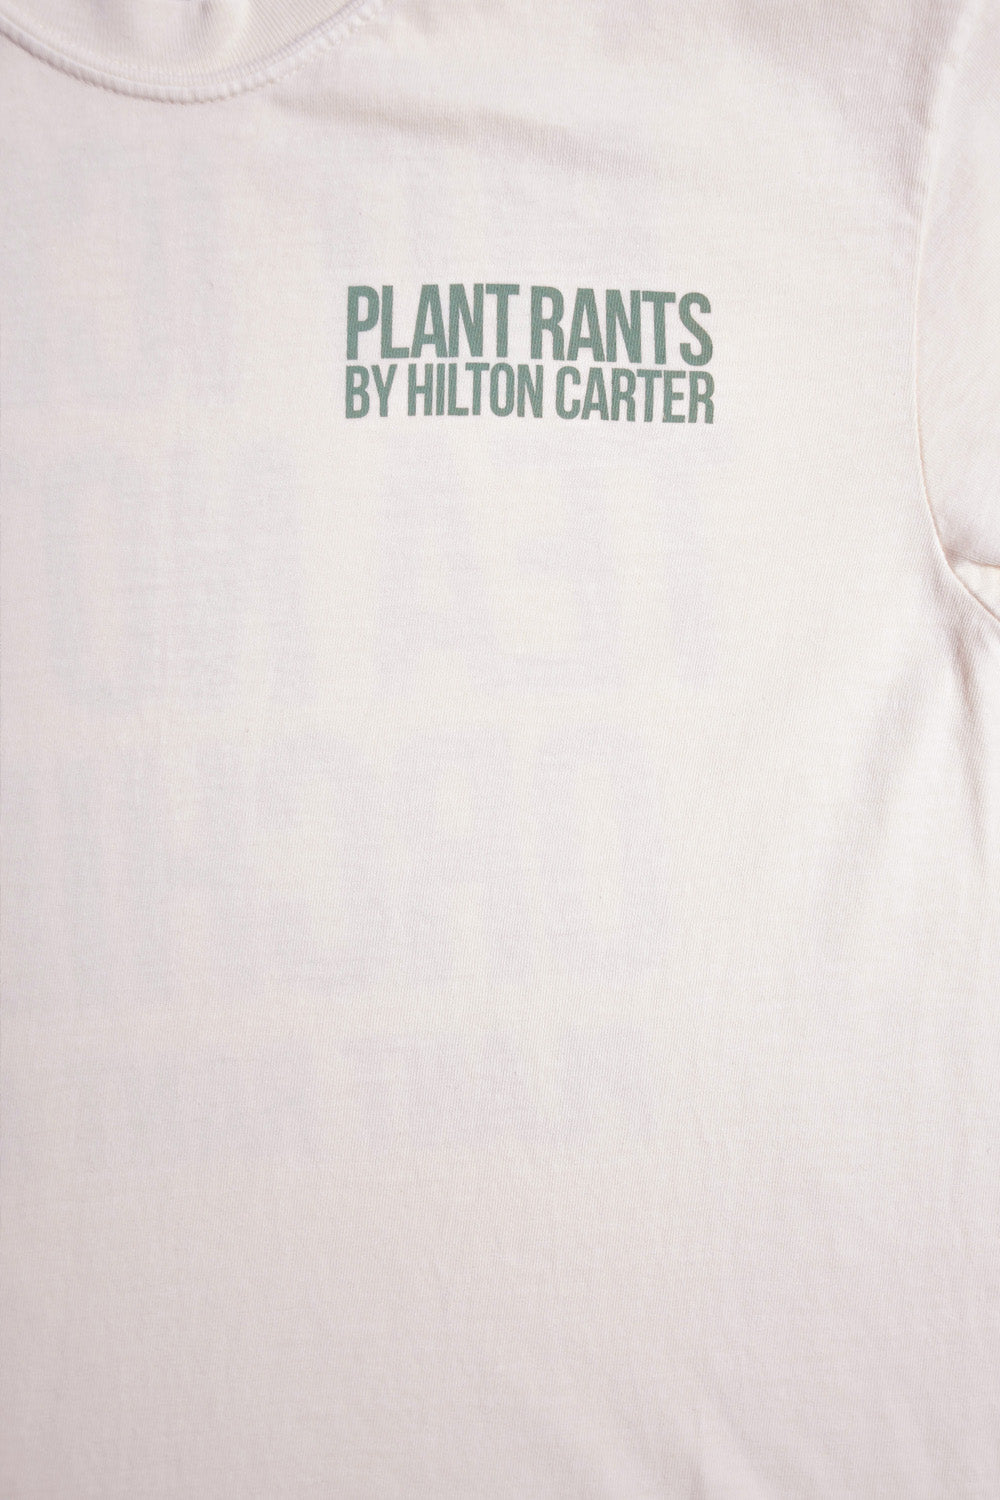 Limited Edition Plant Rant Tee - So Icy